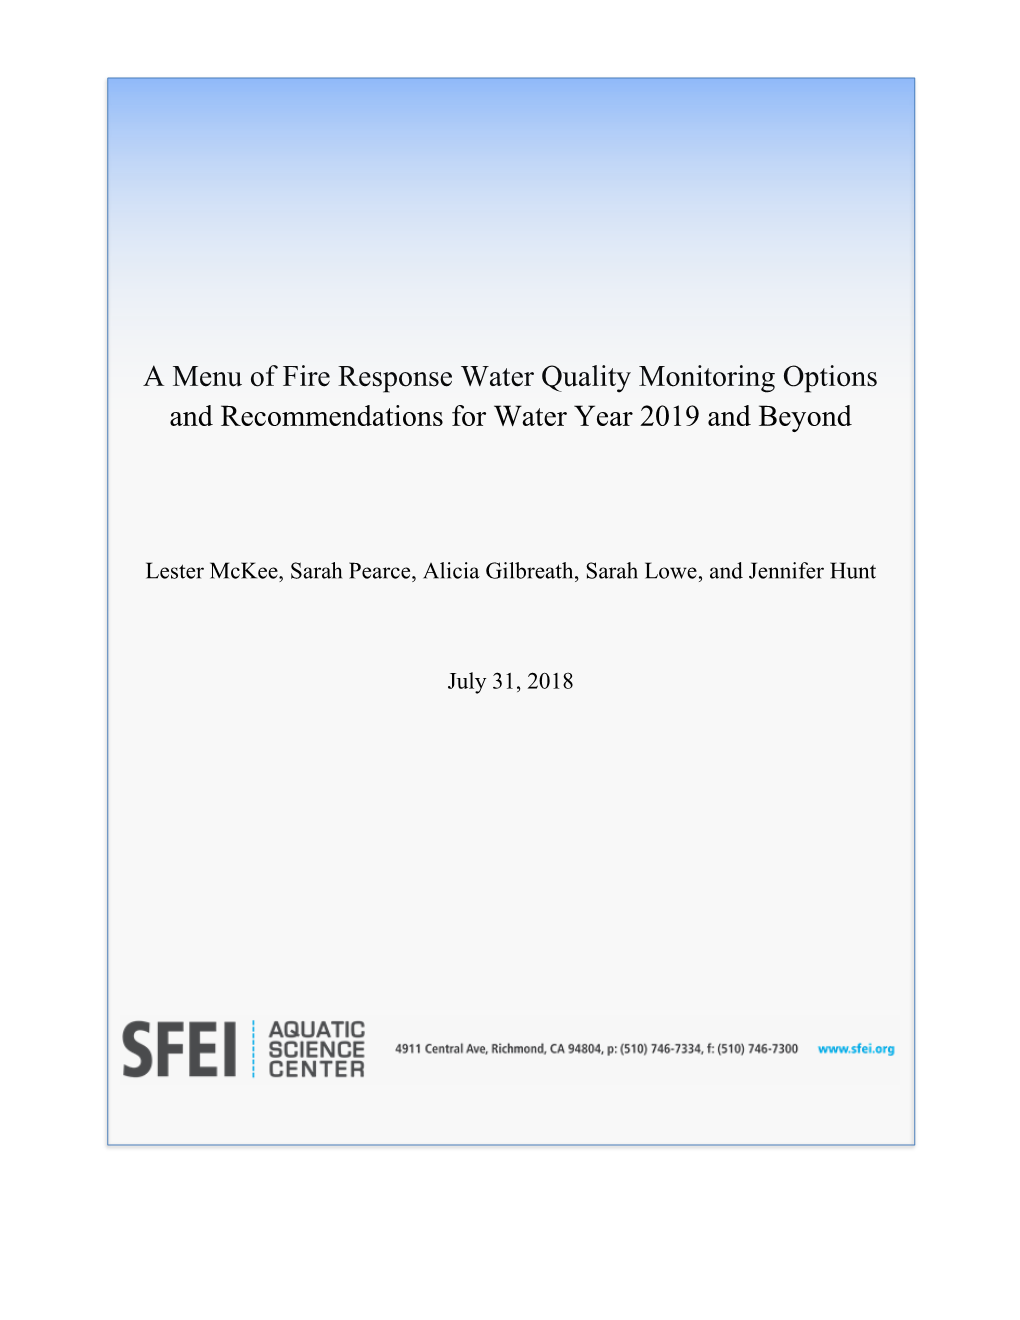 A Menu of Fire Response Water Quality Monitoring Options and Recommendations for Water Year 2019 and Beyond